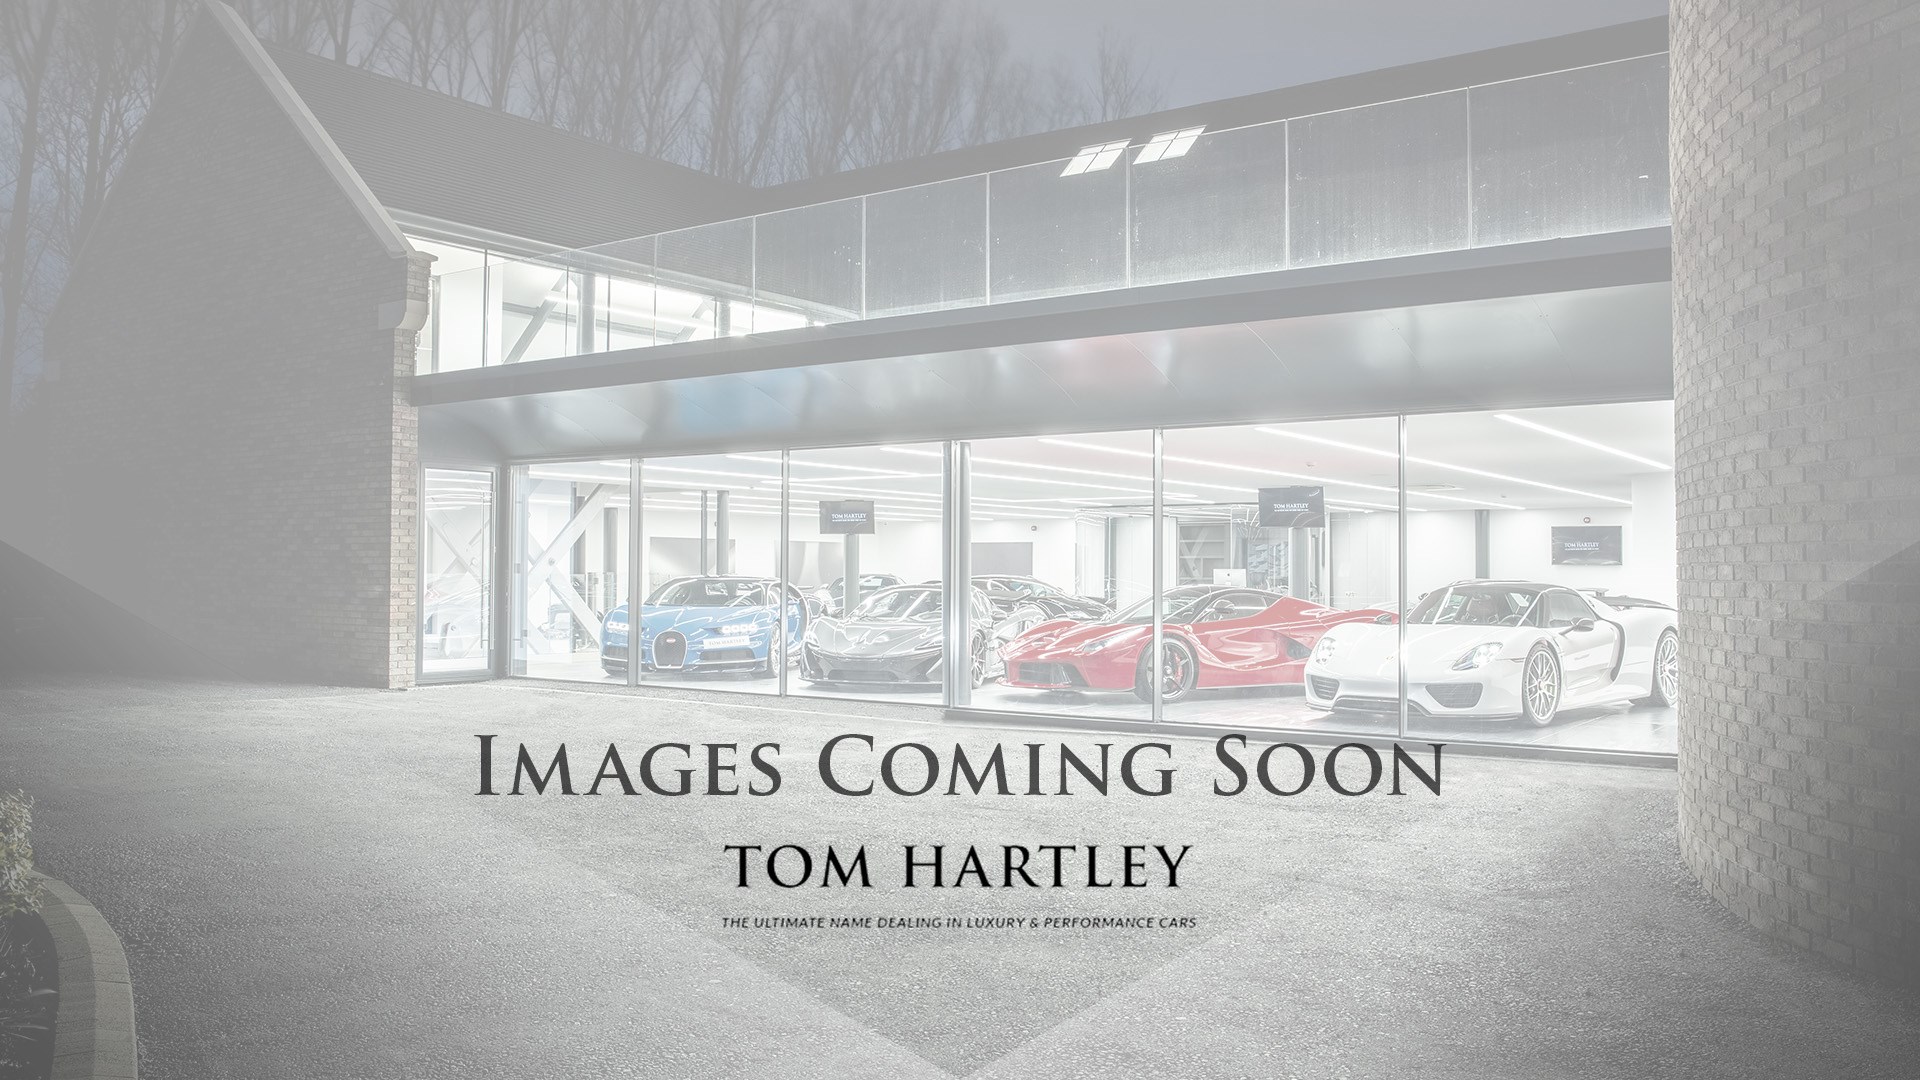 Used 2015 Ferrari 458 Speciale AB at Tom Hartley